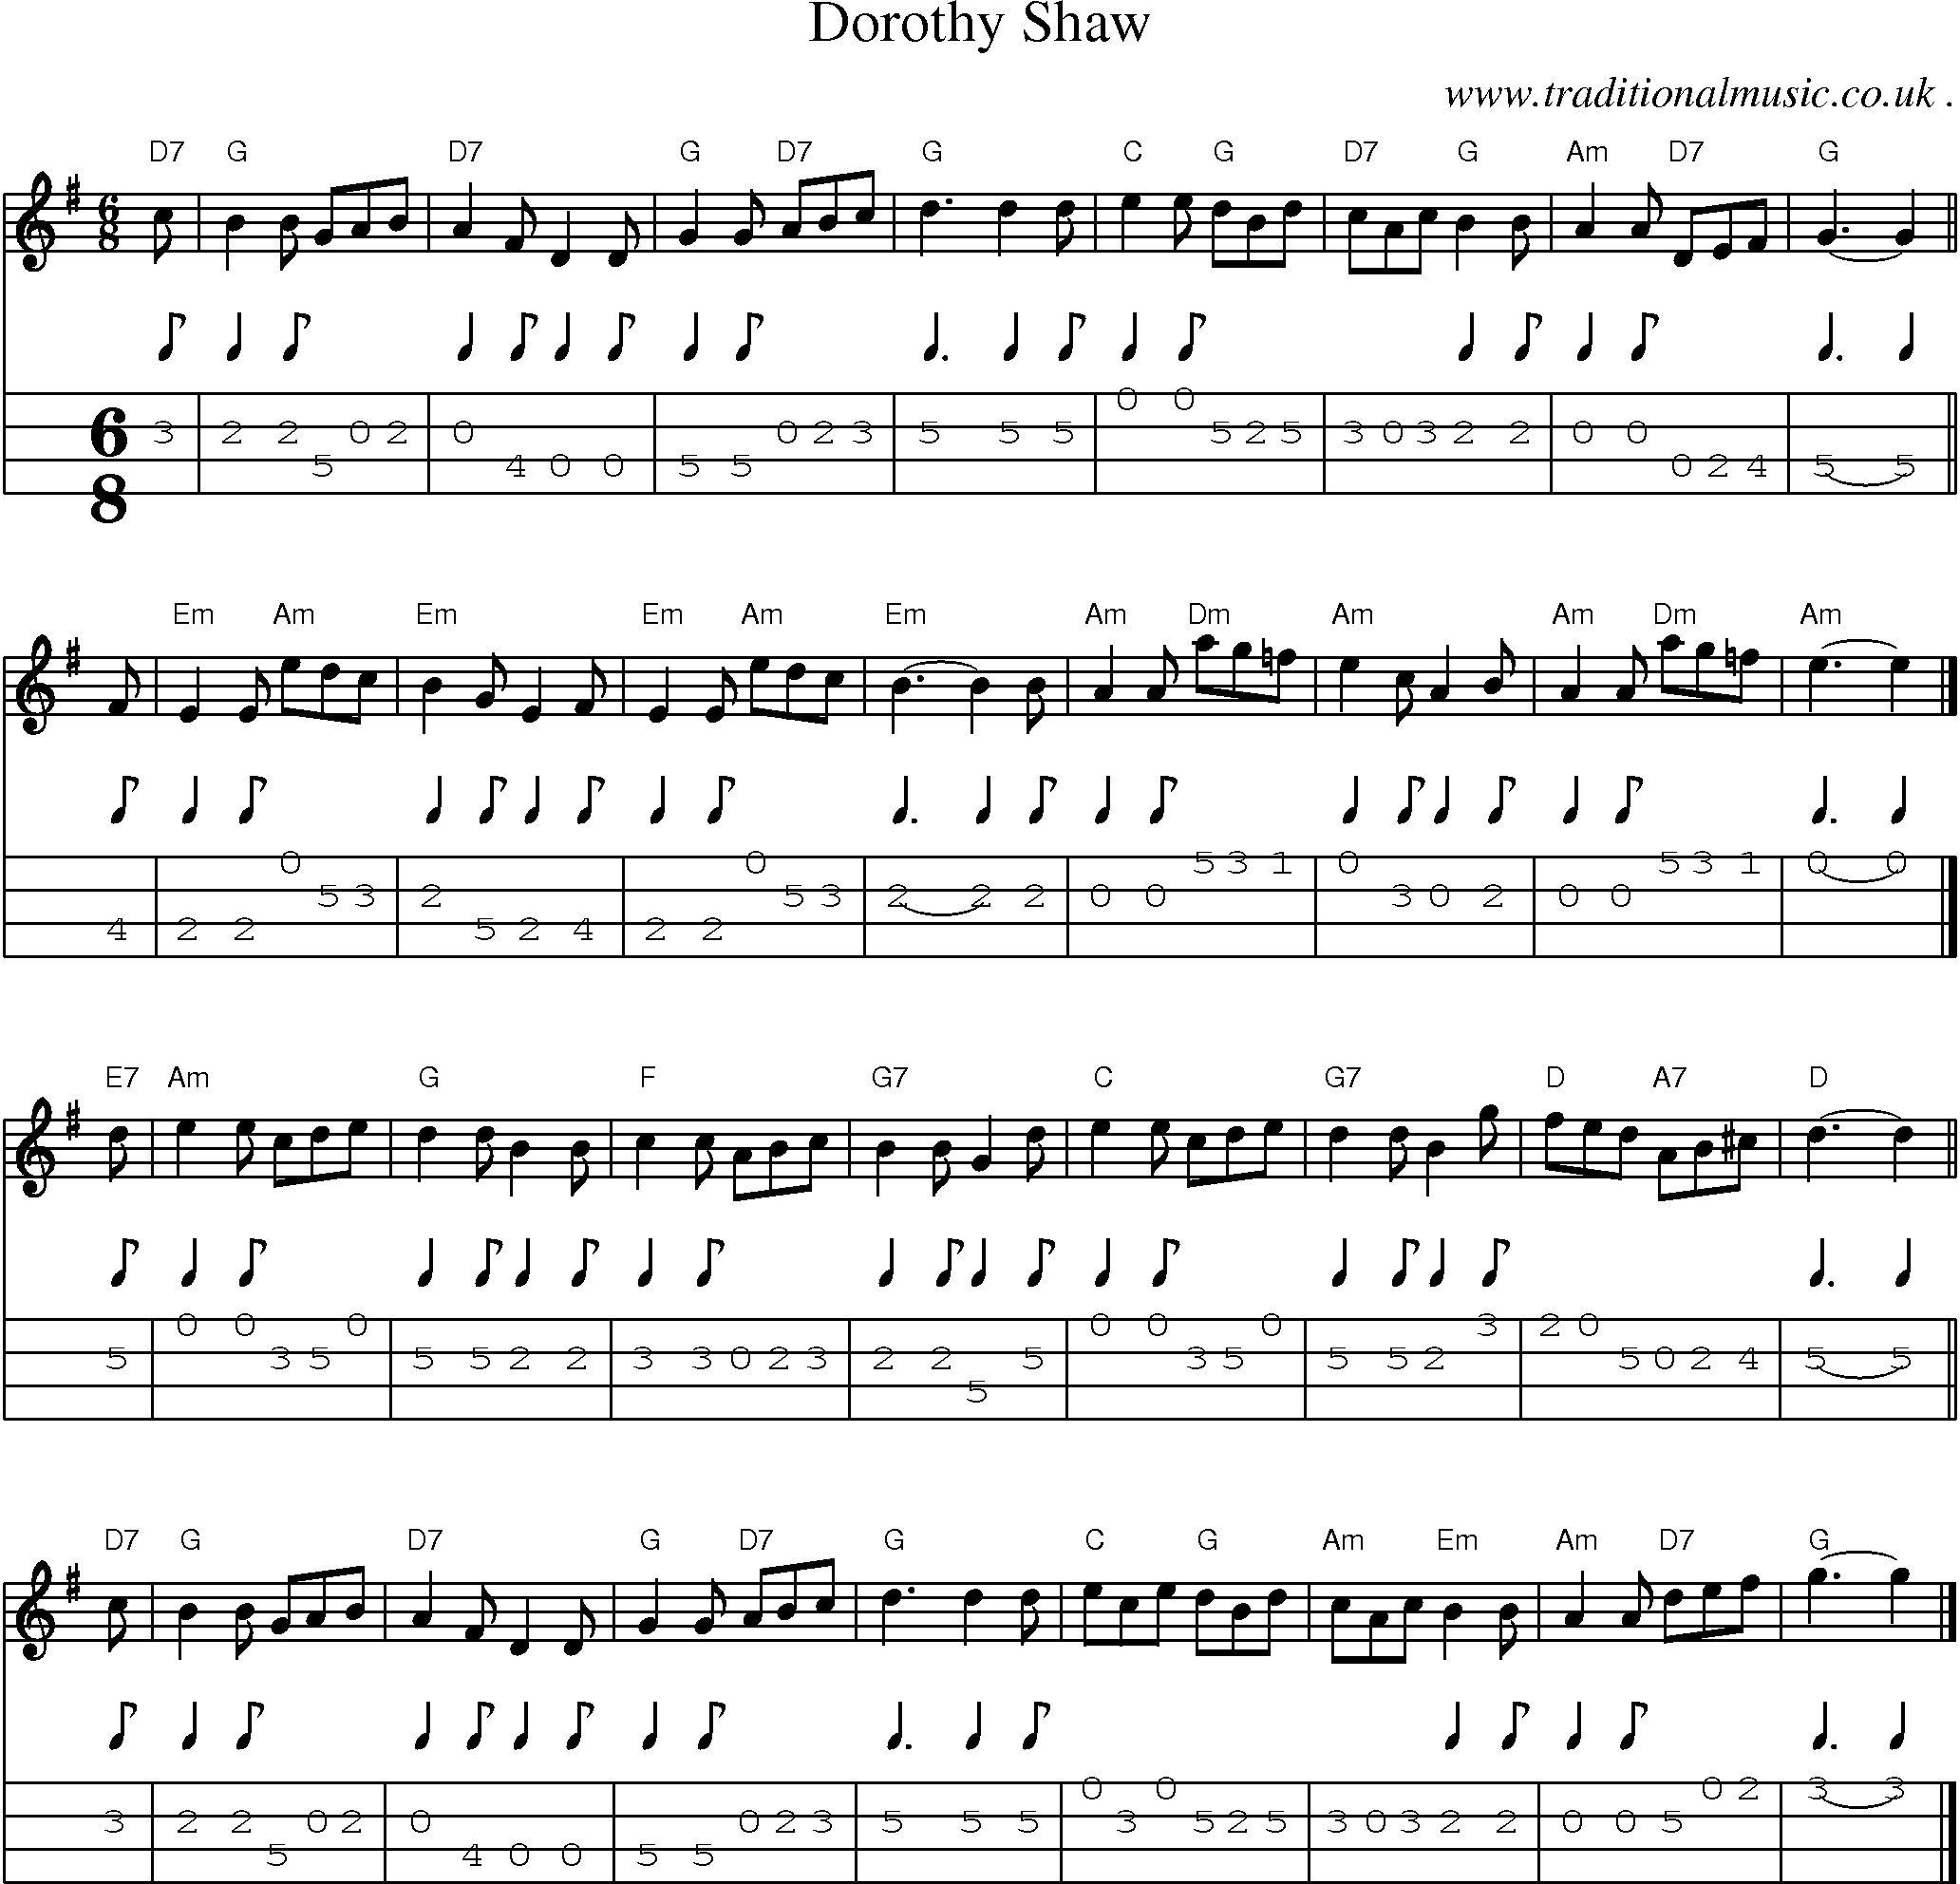 Sheet-music  score, Chords and Mandolin Tabs for Dorothy Shaw